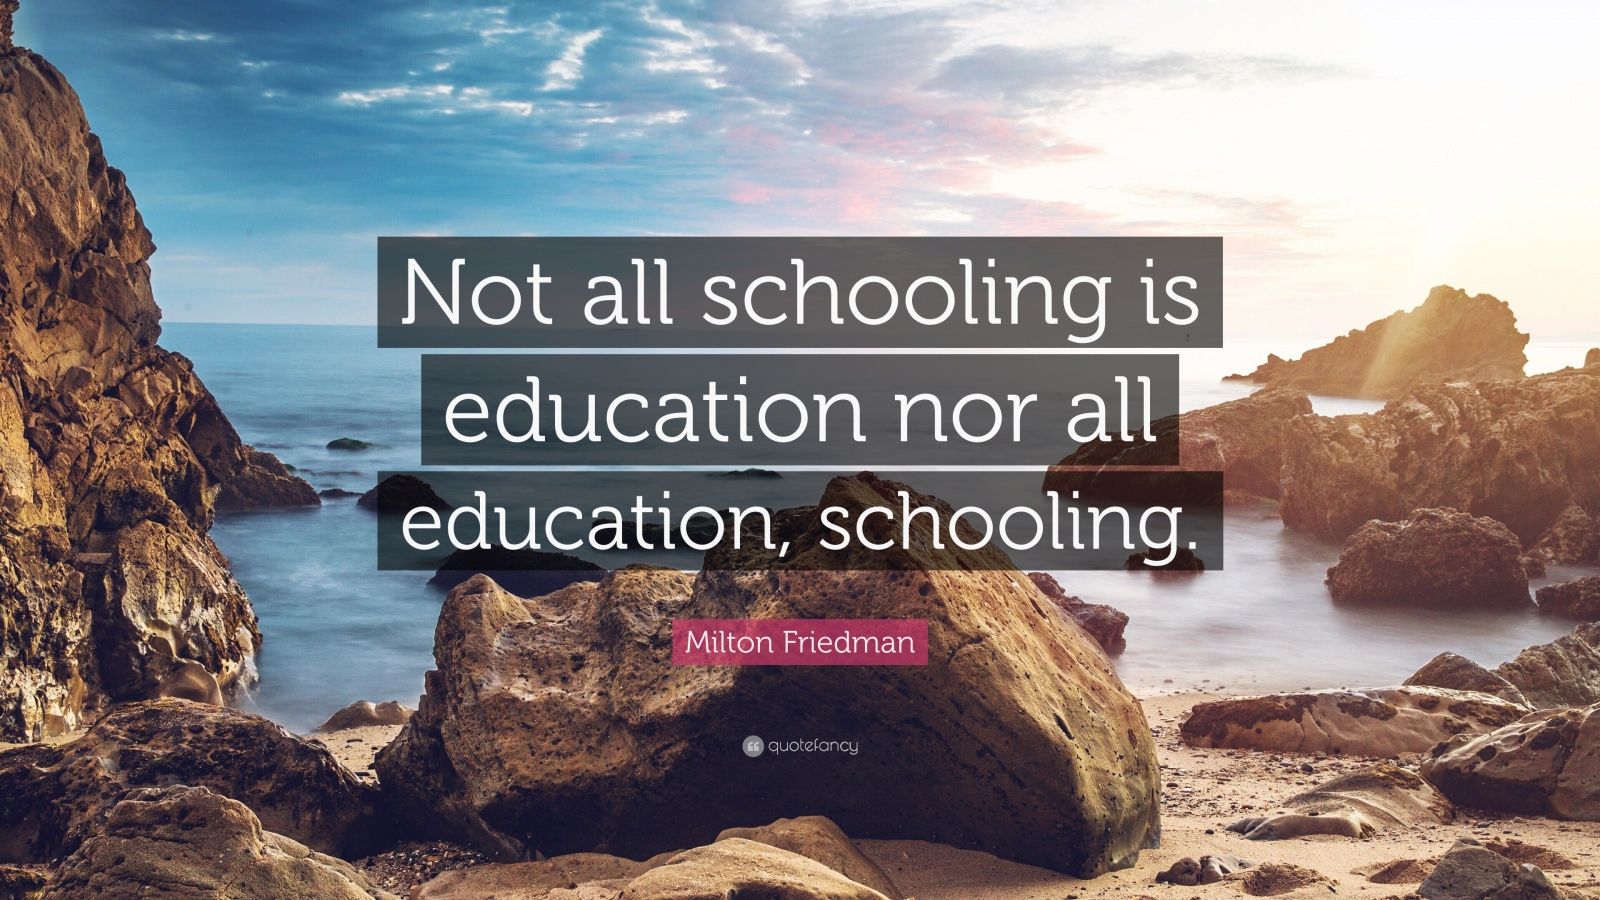 Milton Friedman Quote: “Not all schooling is education nor all ...